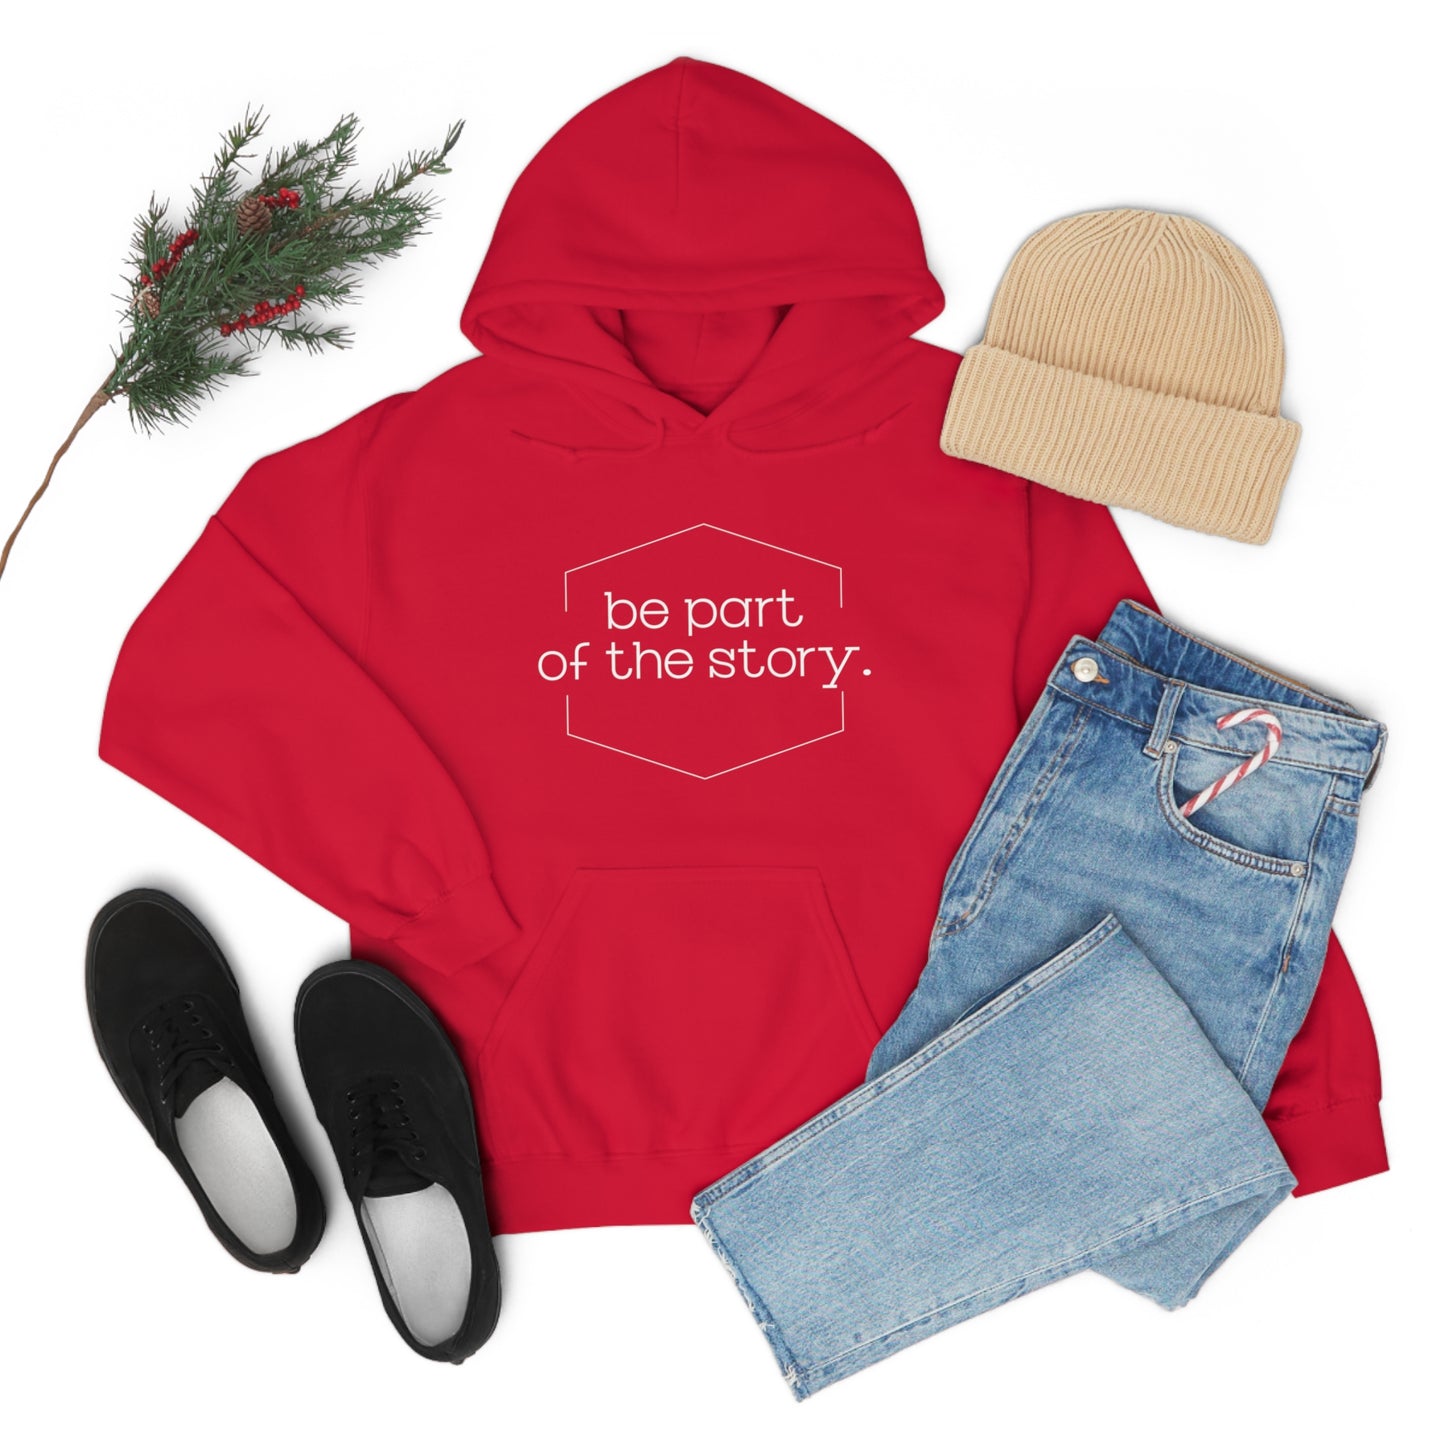 Be Part of the Story English Hooded Sweatshirt